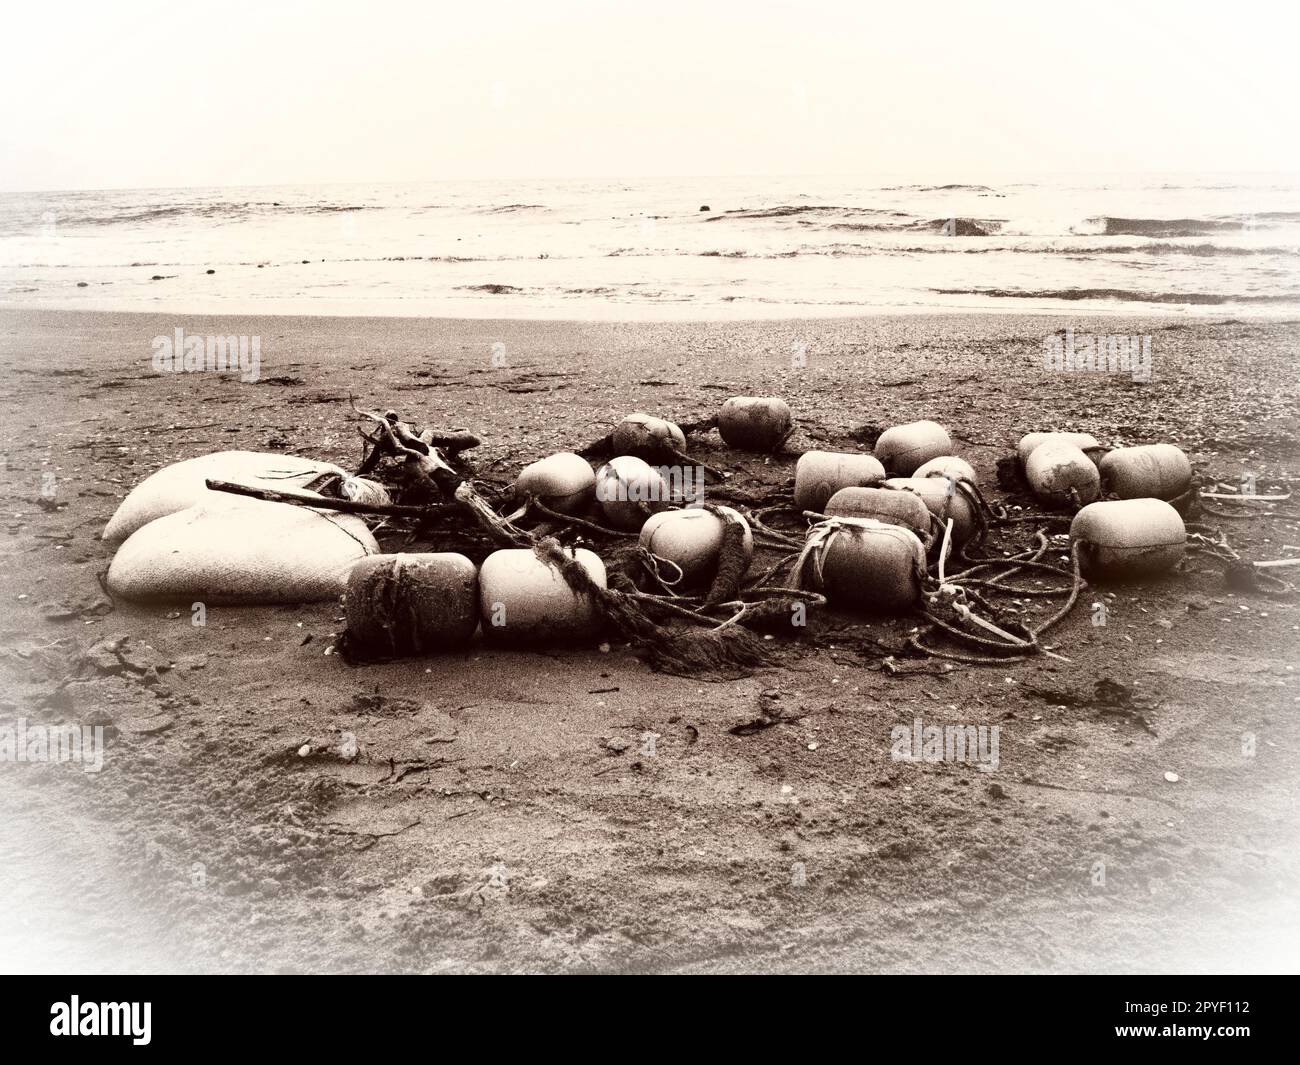 Buoys in the sand. A beach with wet coarse quartz sand. Tangled ropes and plastic buoys left on the shore. Safety equipment. The end of the summer season. Stormy weather at sea or ocean. Low tide. Stock Photo